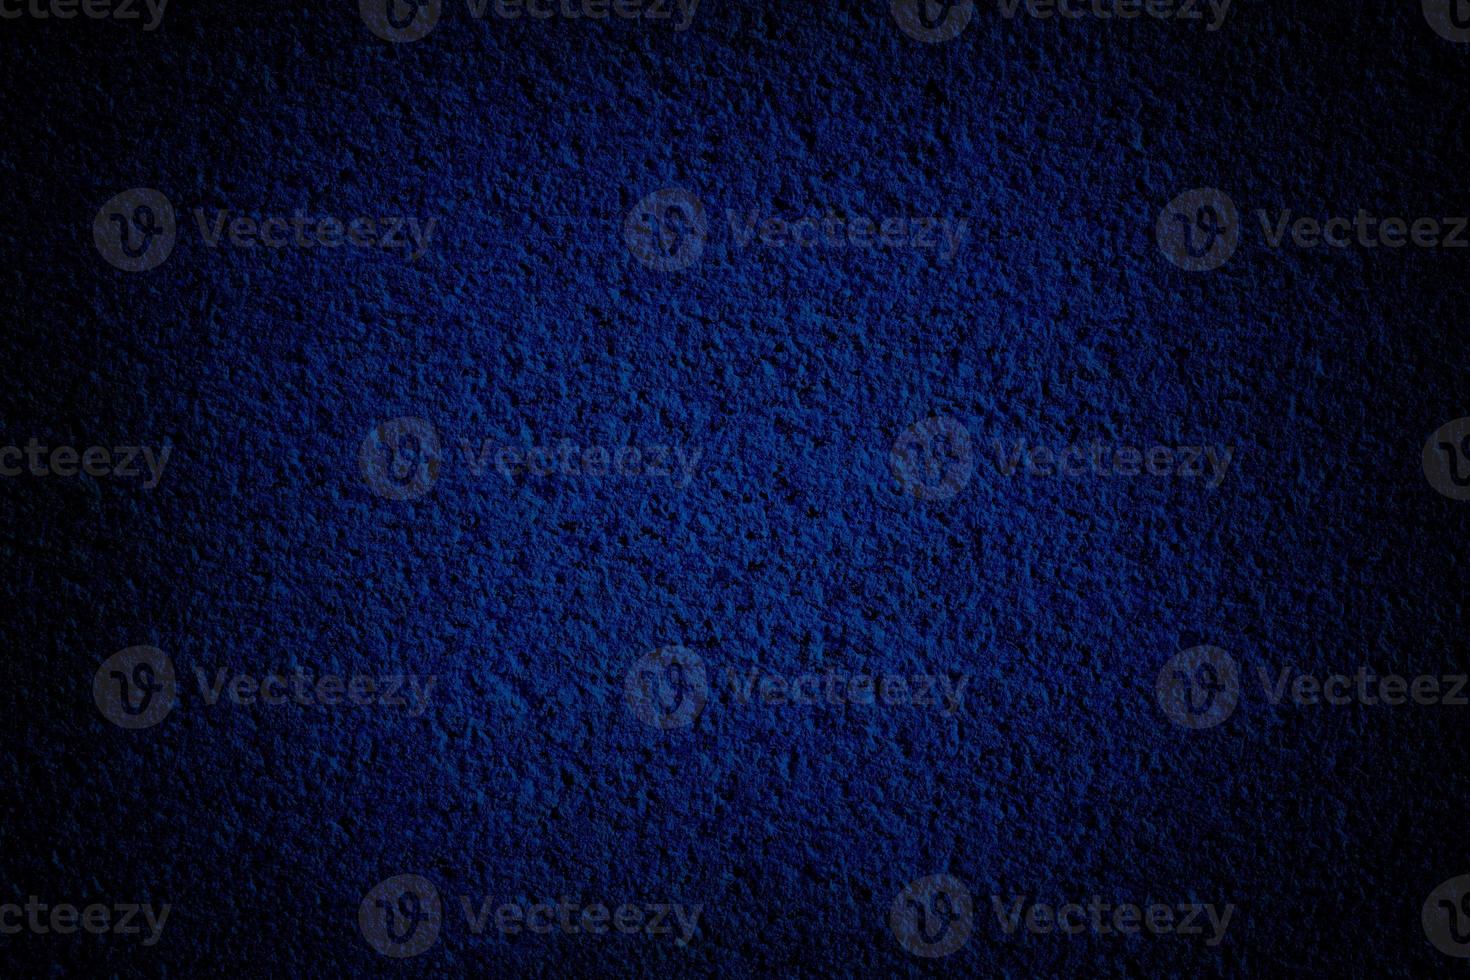 Blue Stone Wall Texture Background in the Dark Tone. photo